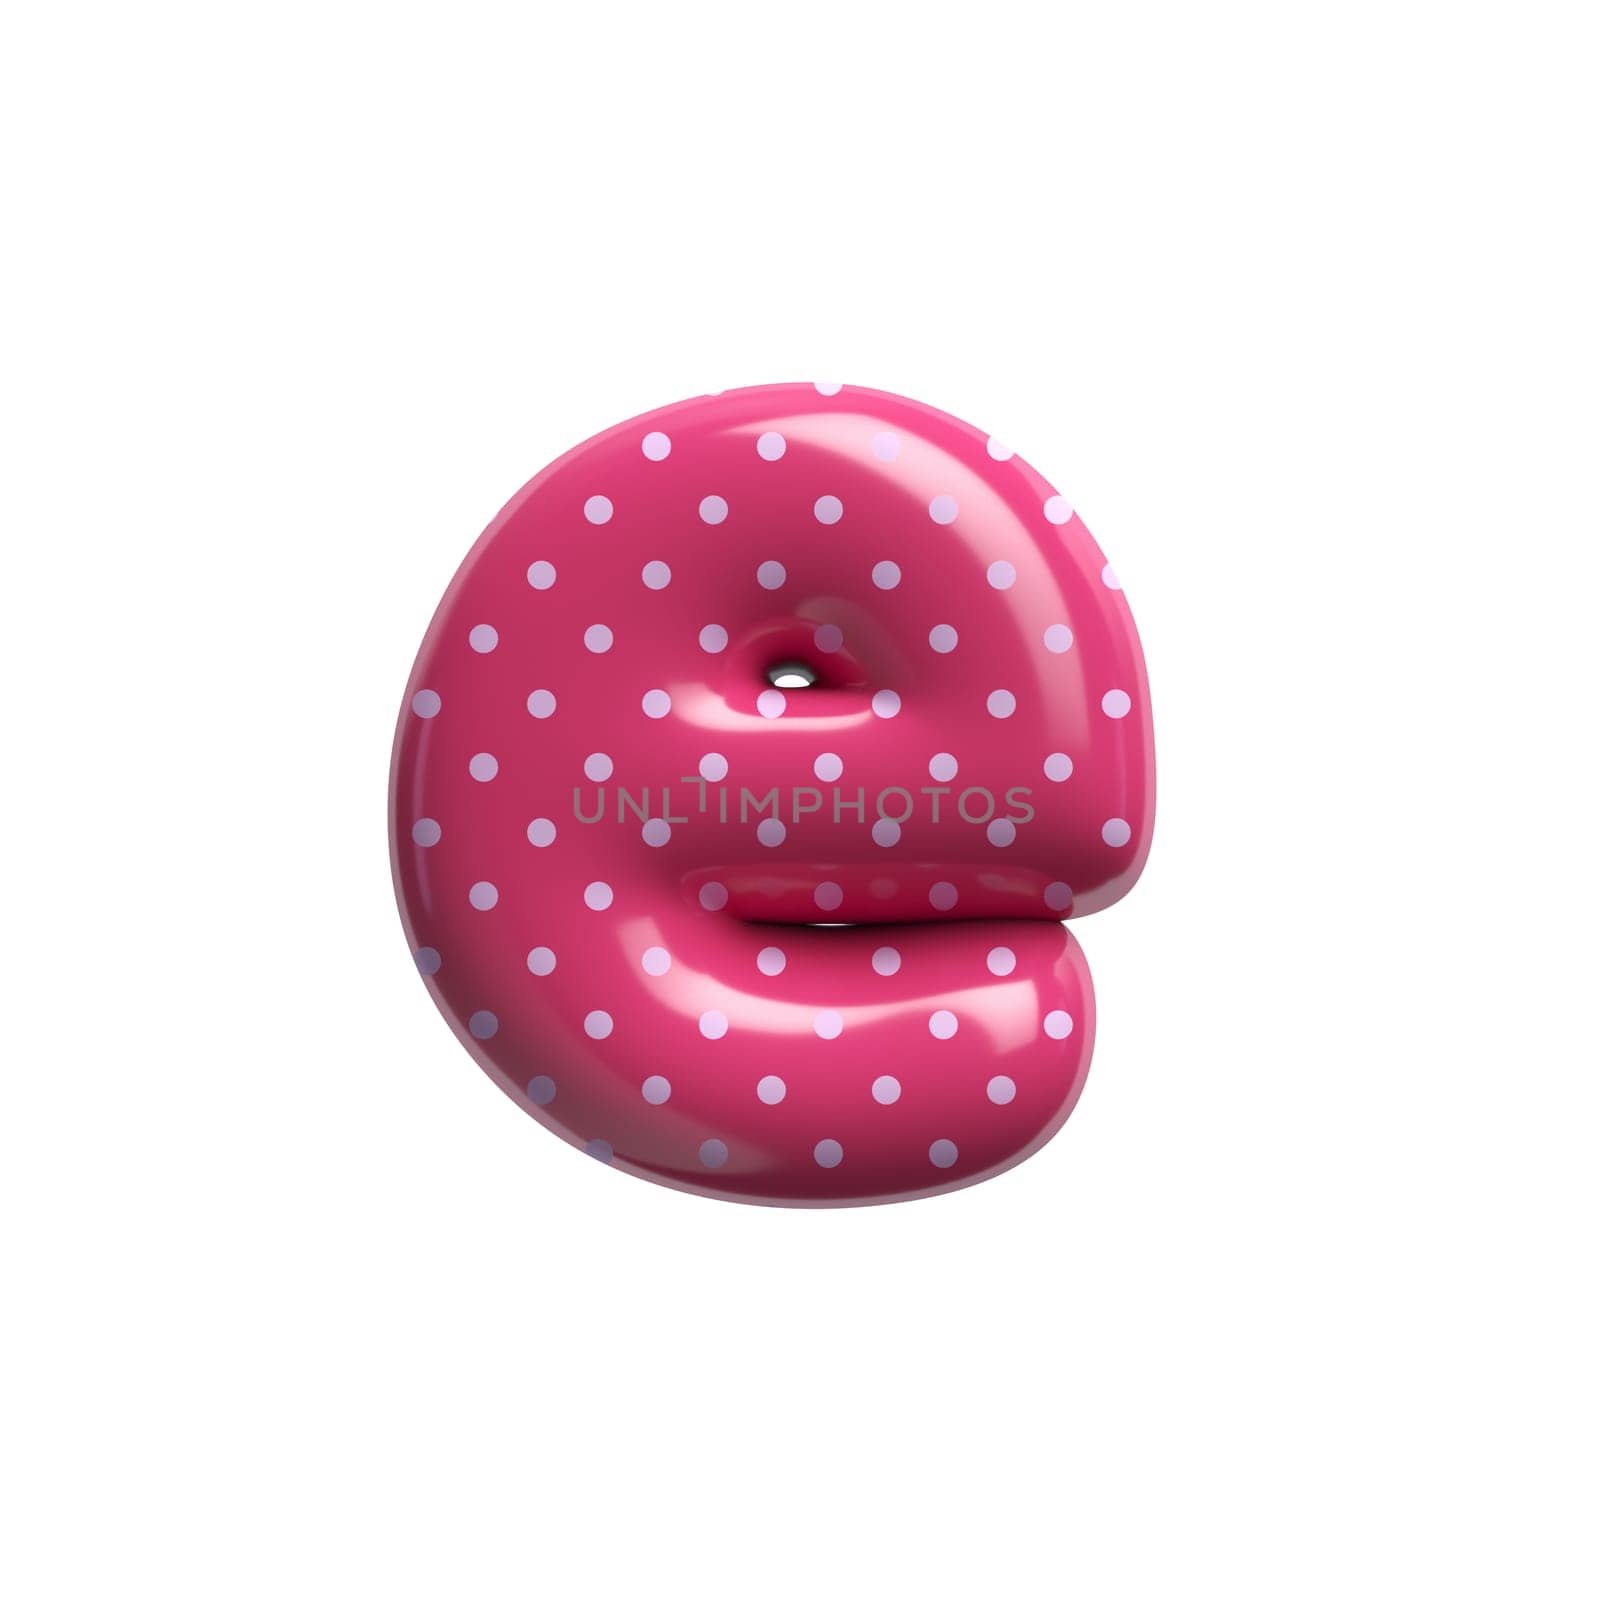 Polka dot letter E - lowercase 3d pink retro font isolated on white background. This alphabet is perfect for creative illustrations related but not limited to Fashion, retro design, decoration...